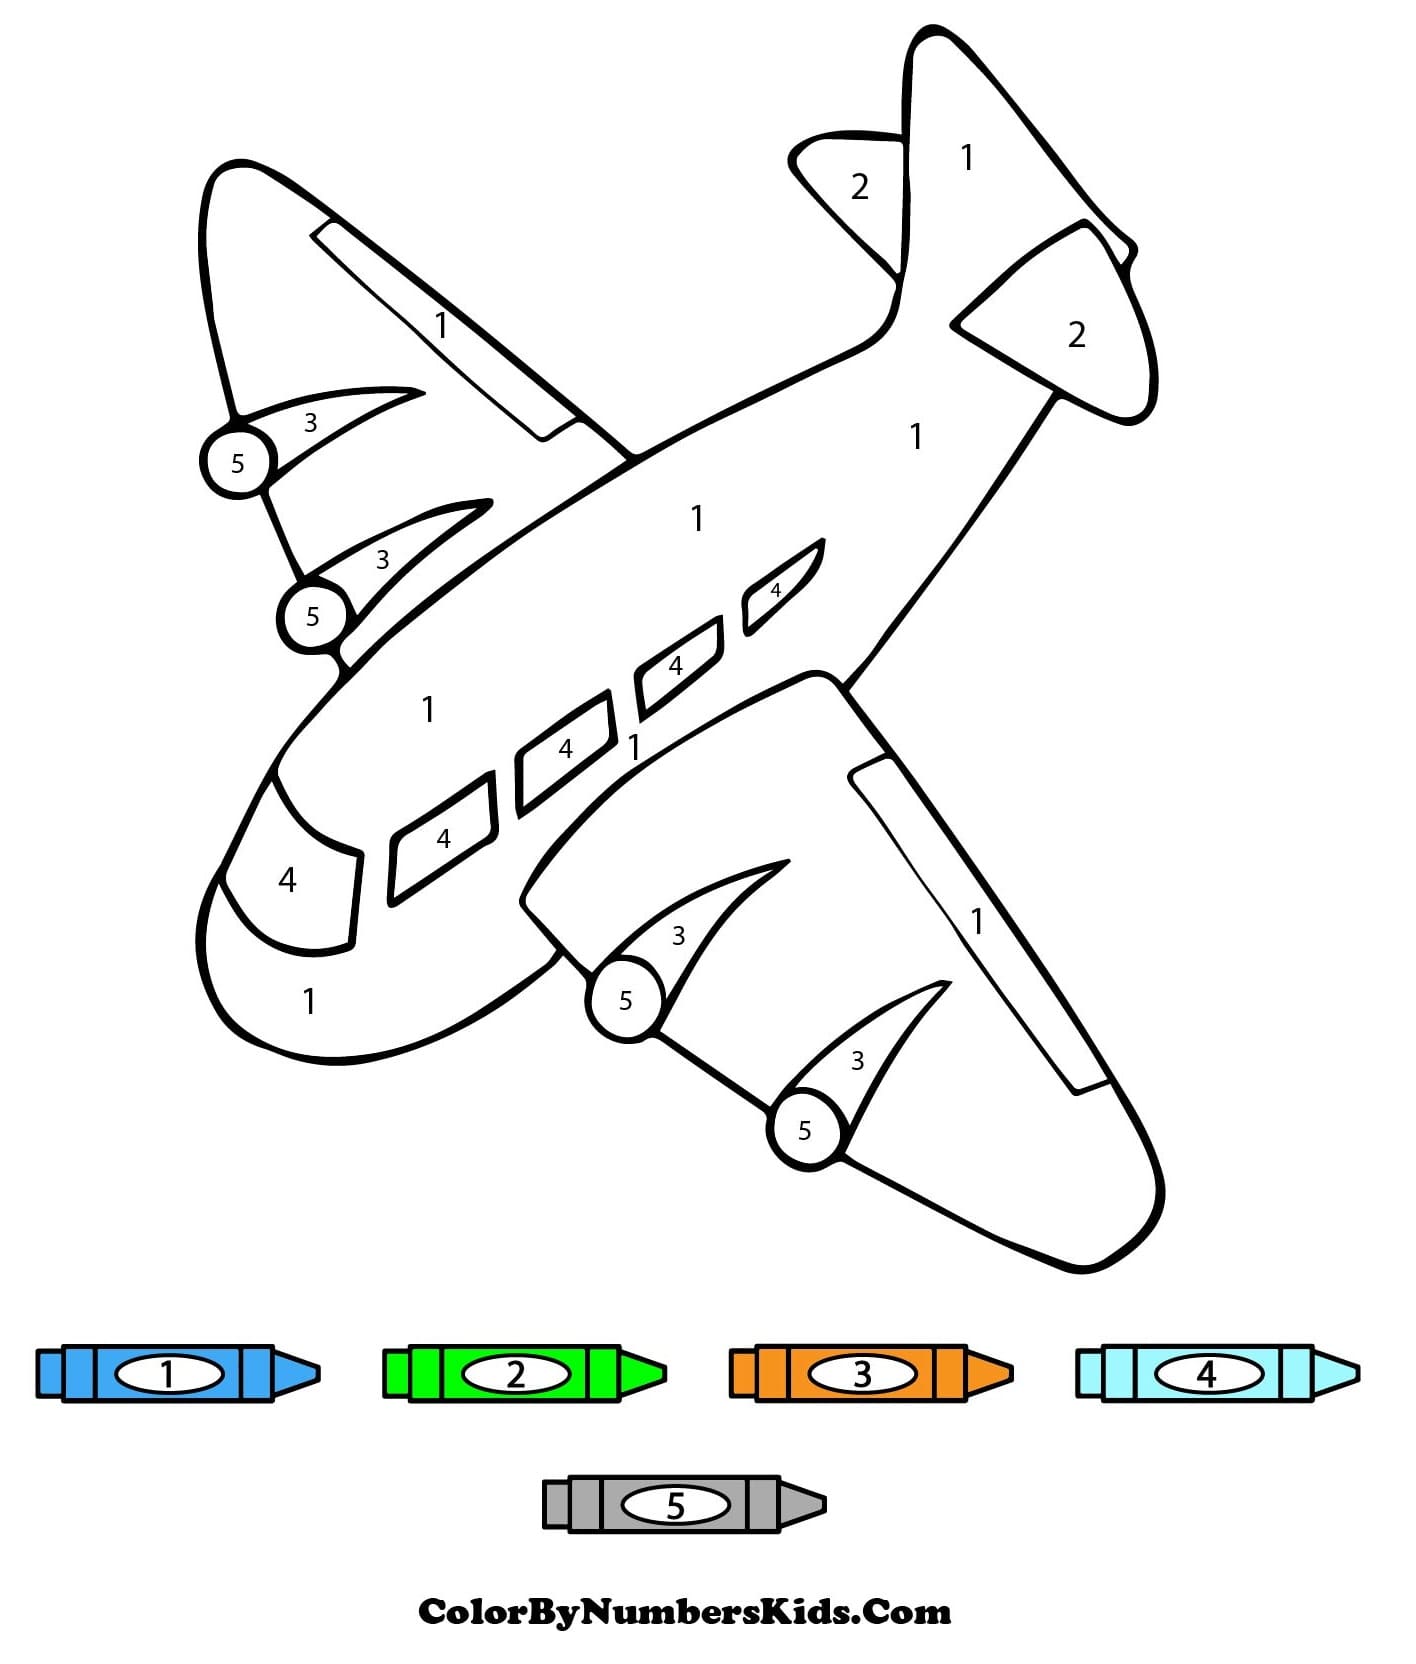 Airplane Color By Number For Kids